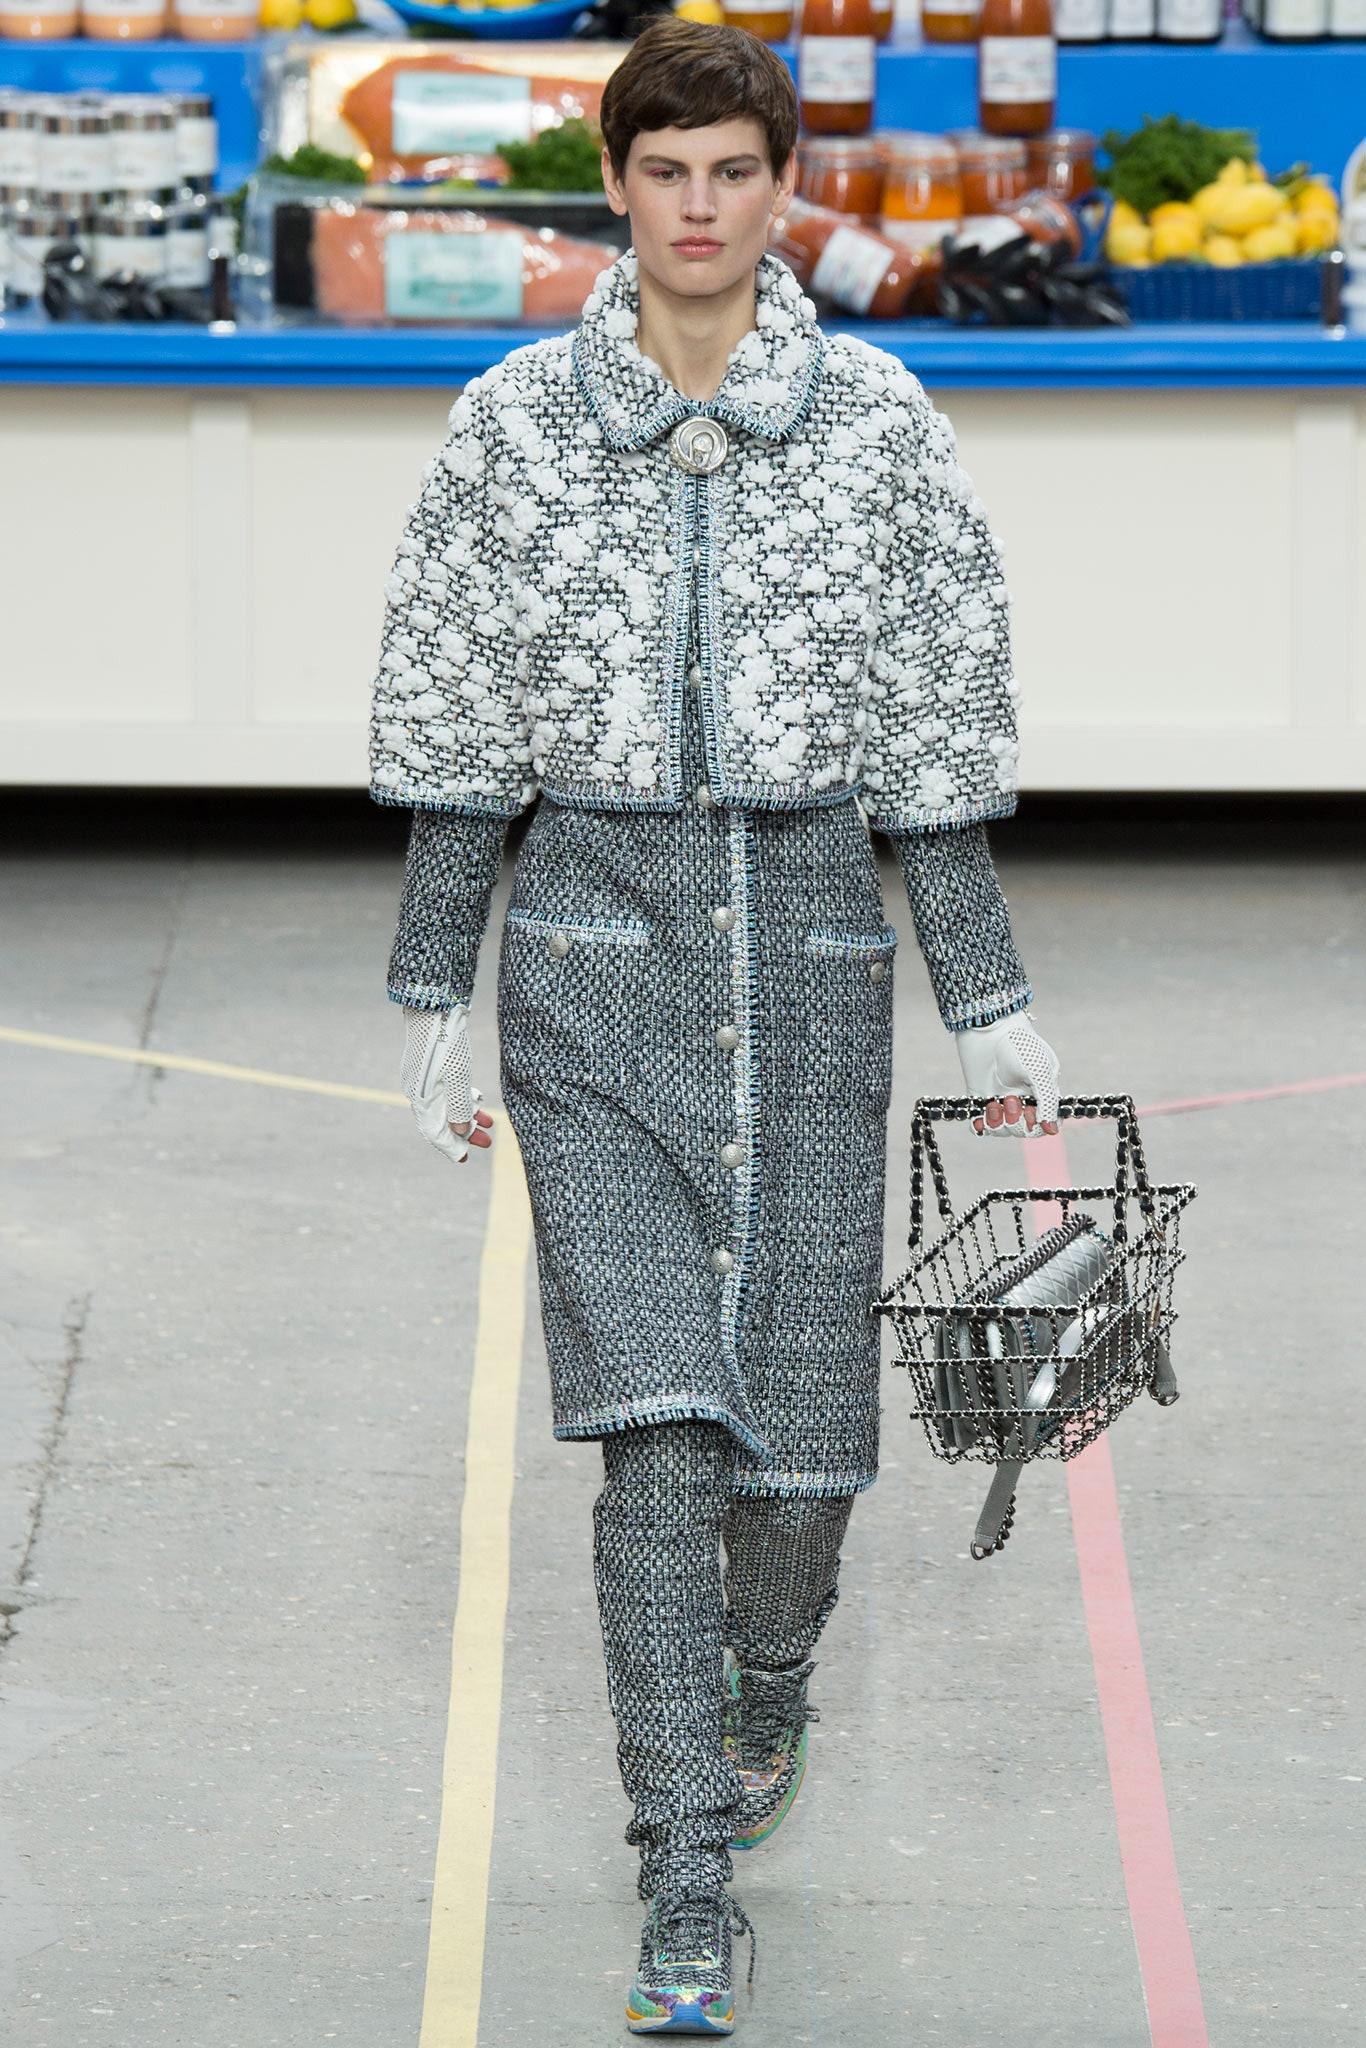 Chanel grey shimmering coat from SUPERMARKET Collection by Karl Lagerfeld : made of luxurious SILK tweed ! Boutique price was over 11,000$
- iconic 4-flap-pockets silhouette
- CC logo buttons at front, pockets and cuffs
- tonal silk lining with